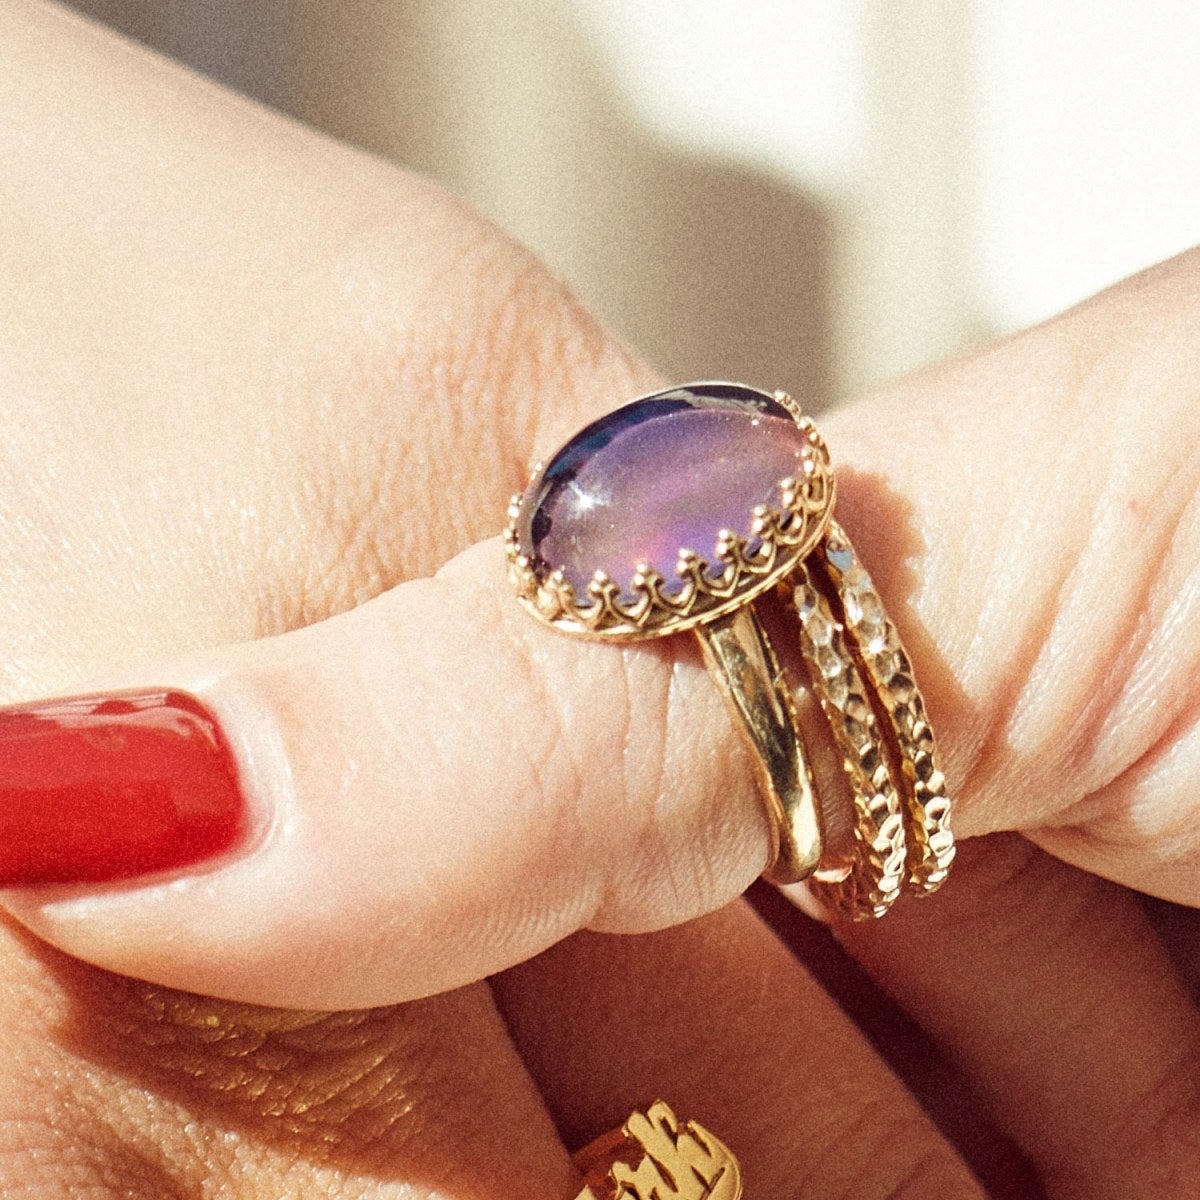 Mood Rings Are Back And Here's Where To Get Them For As Low As £3